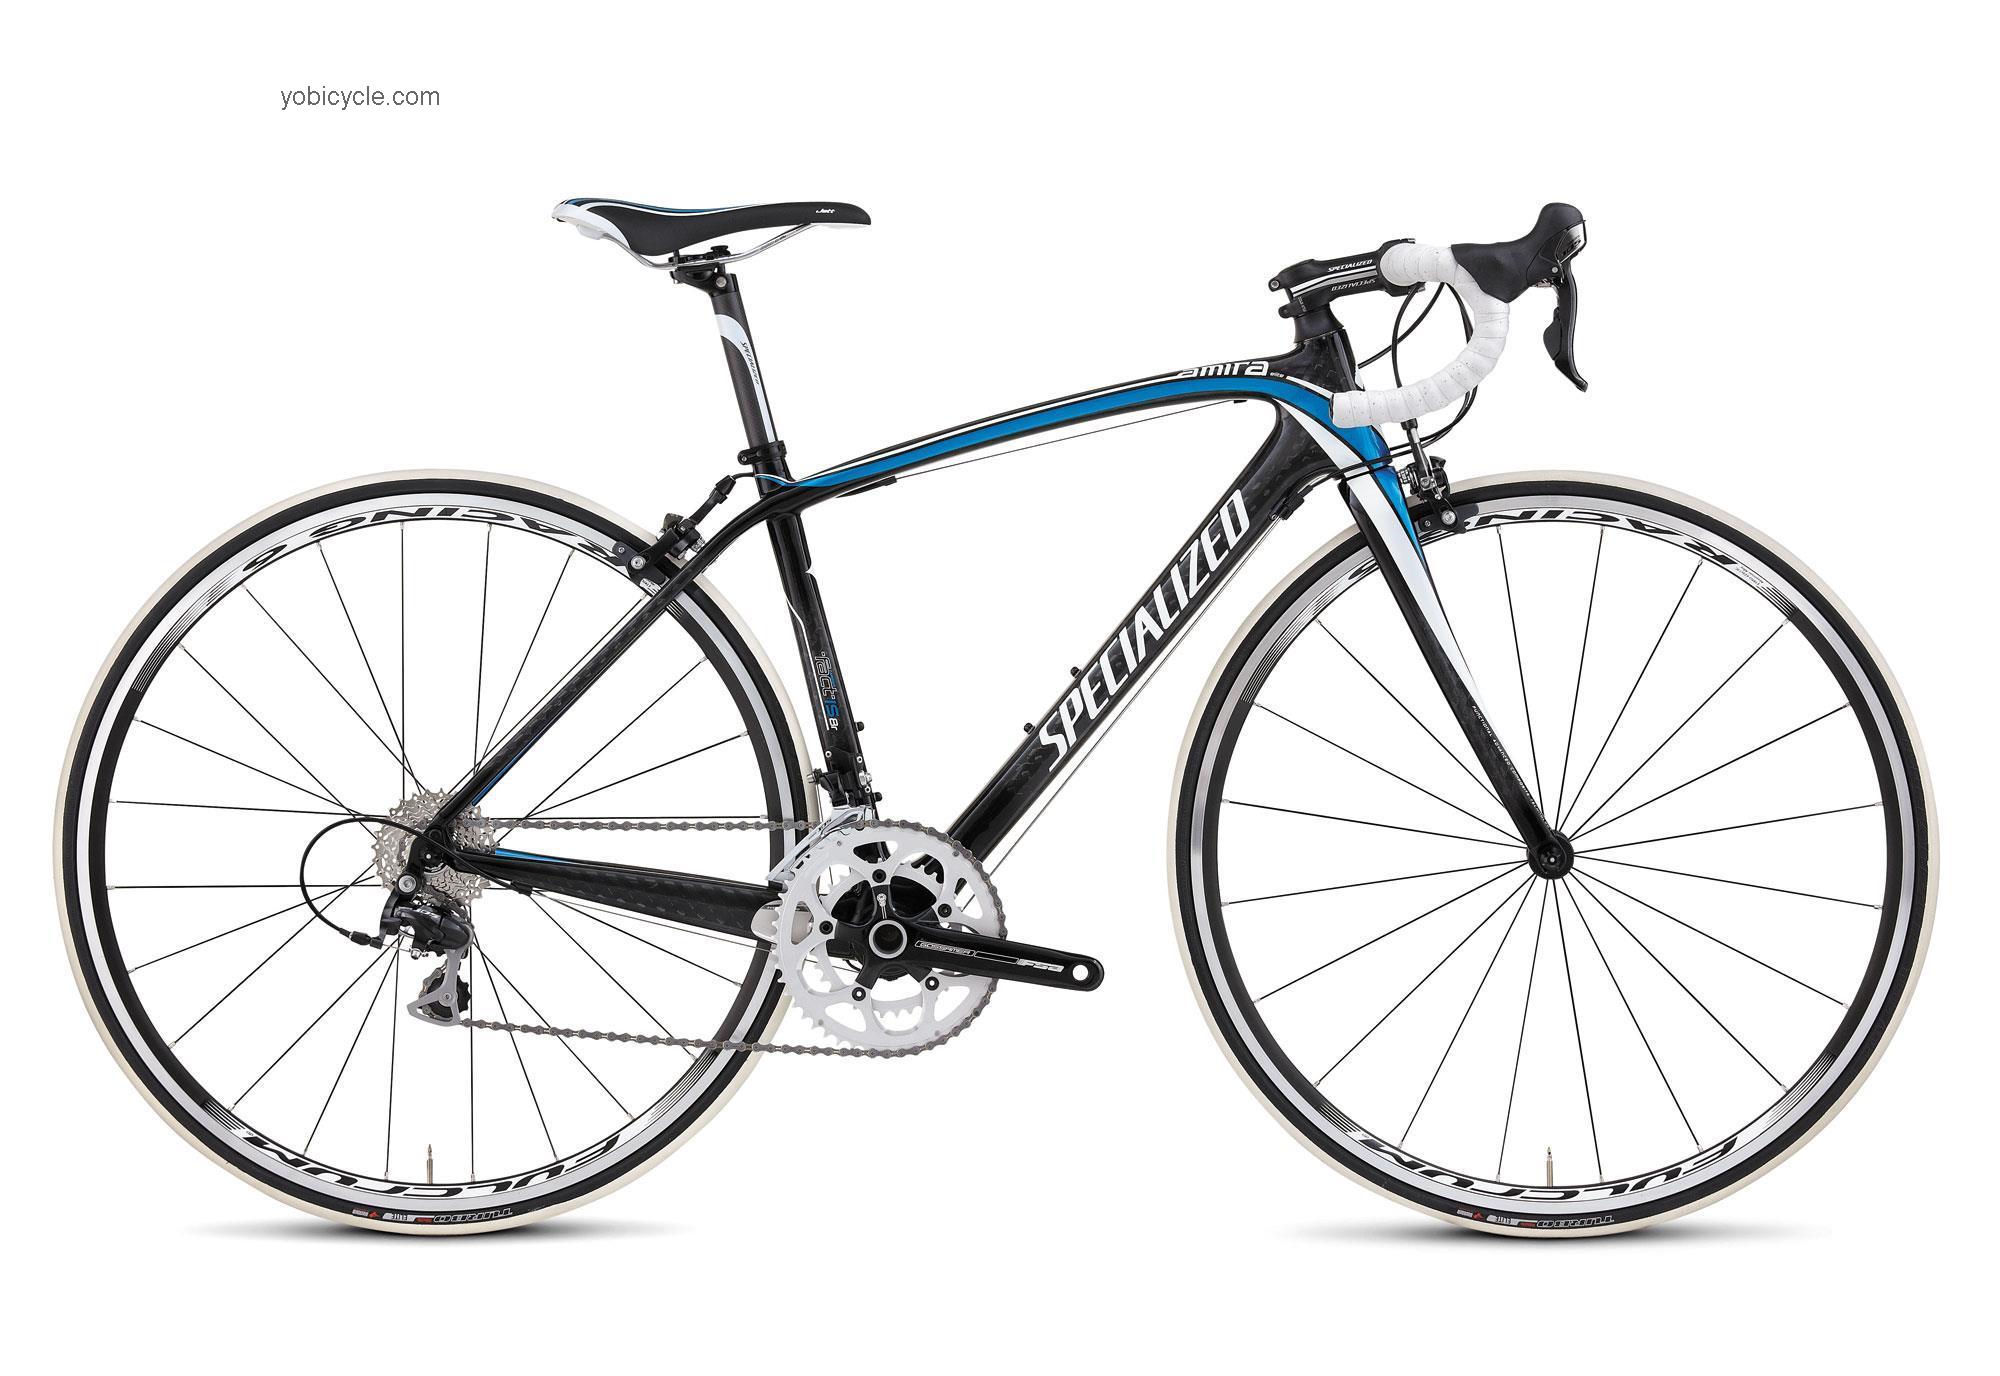 Specialized Amira Elite Compact competitors and comparison tool online specs and performance